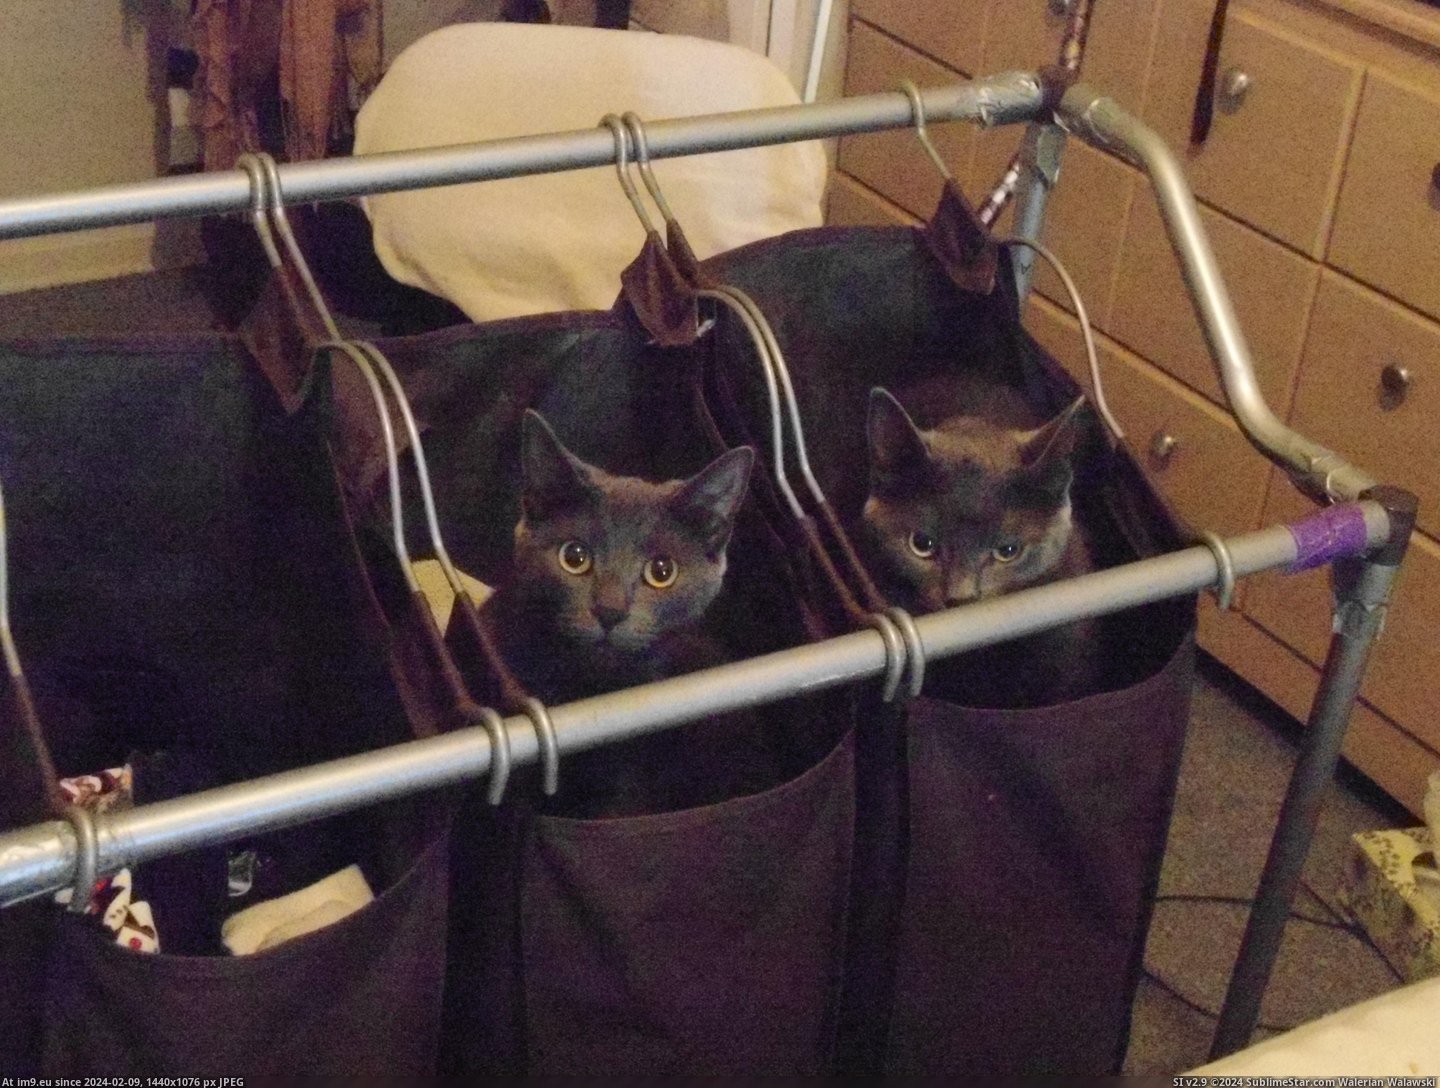 #One #Twin #Evil #Guess [Aww] Can you guess which one is the evil twin? Pic. (Bild von album My r/AWW favs))